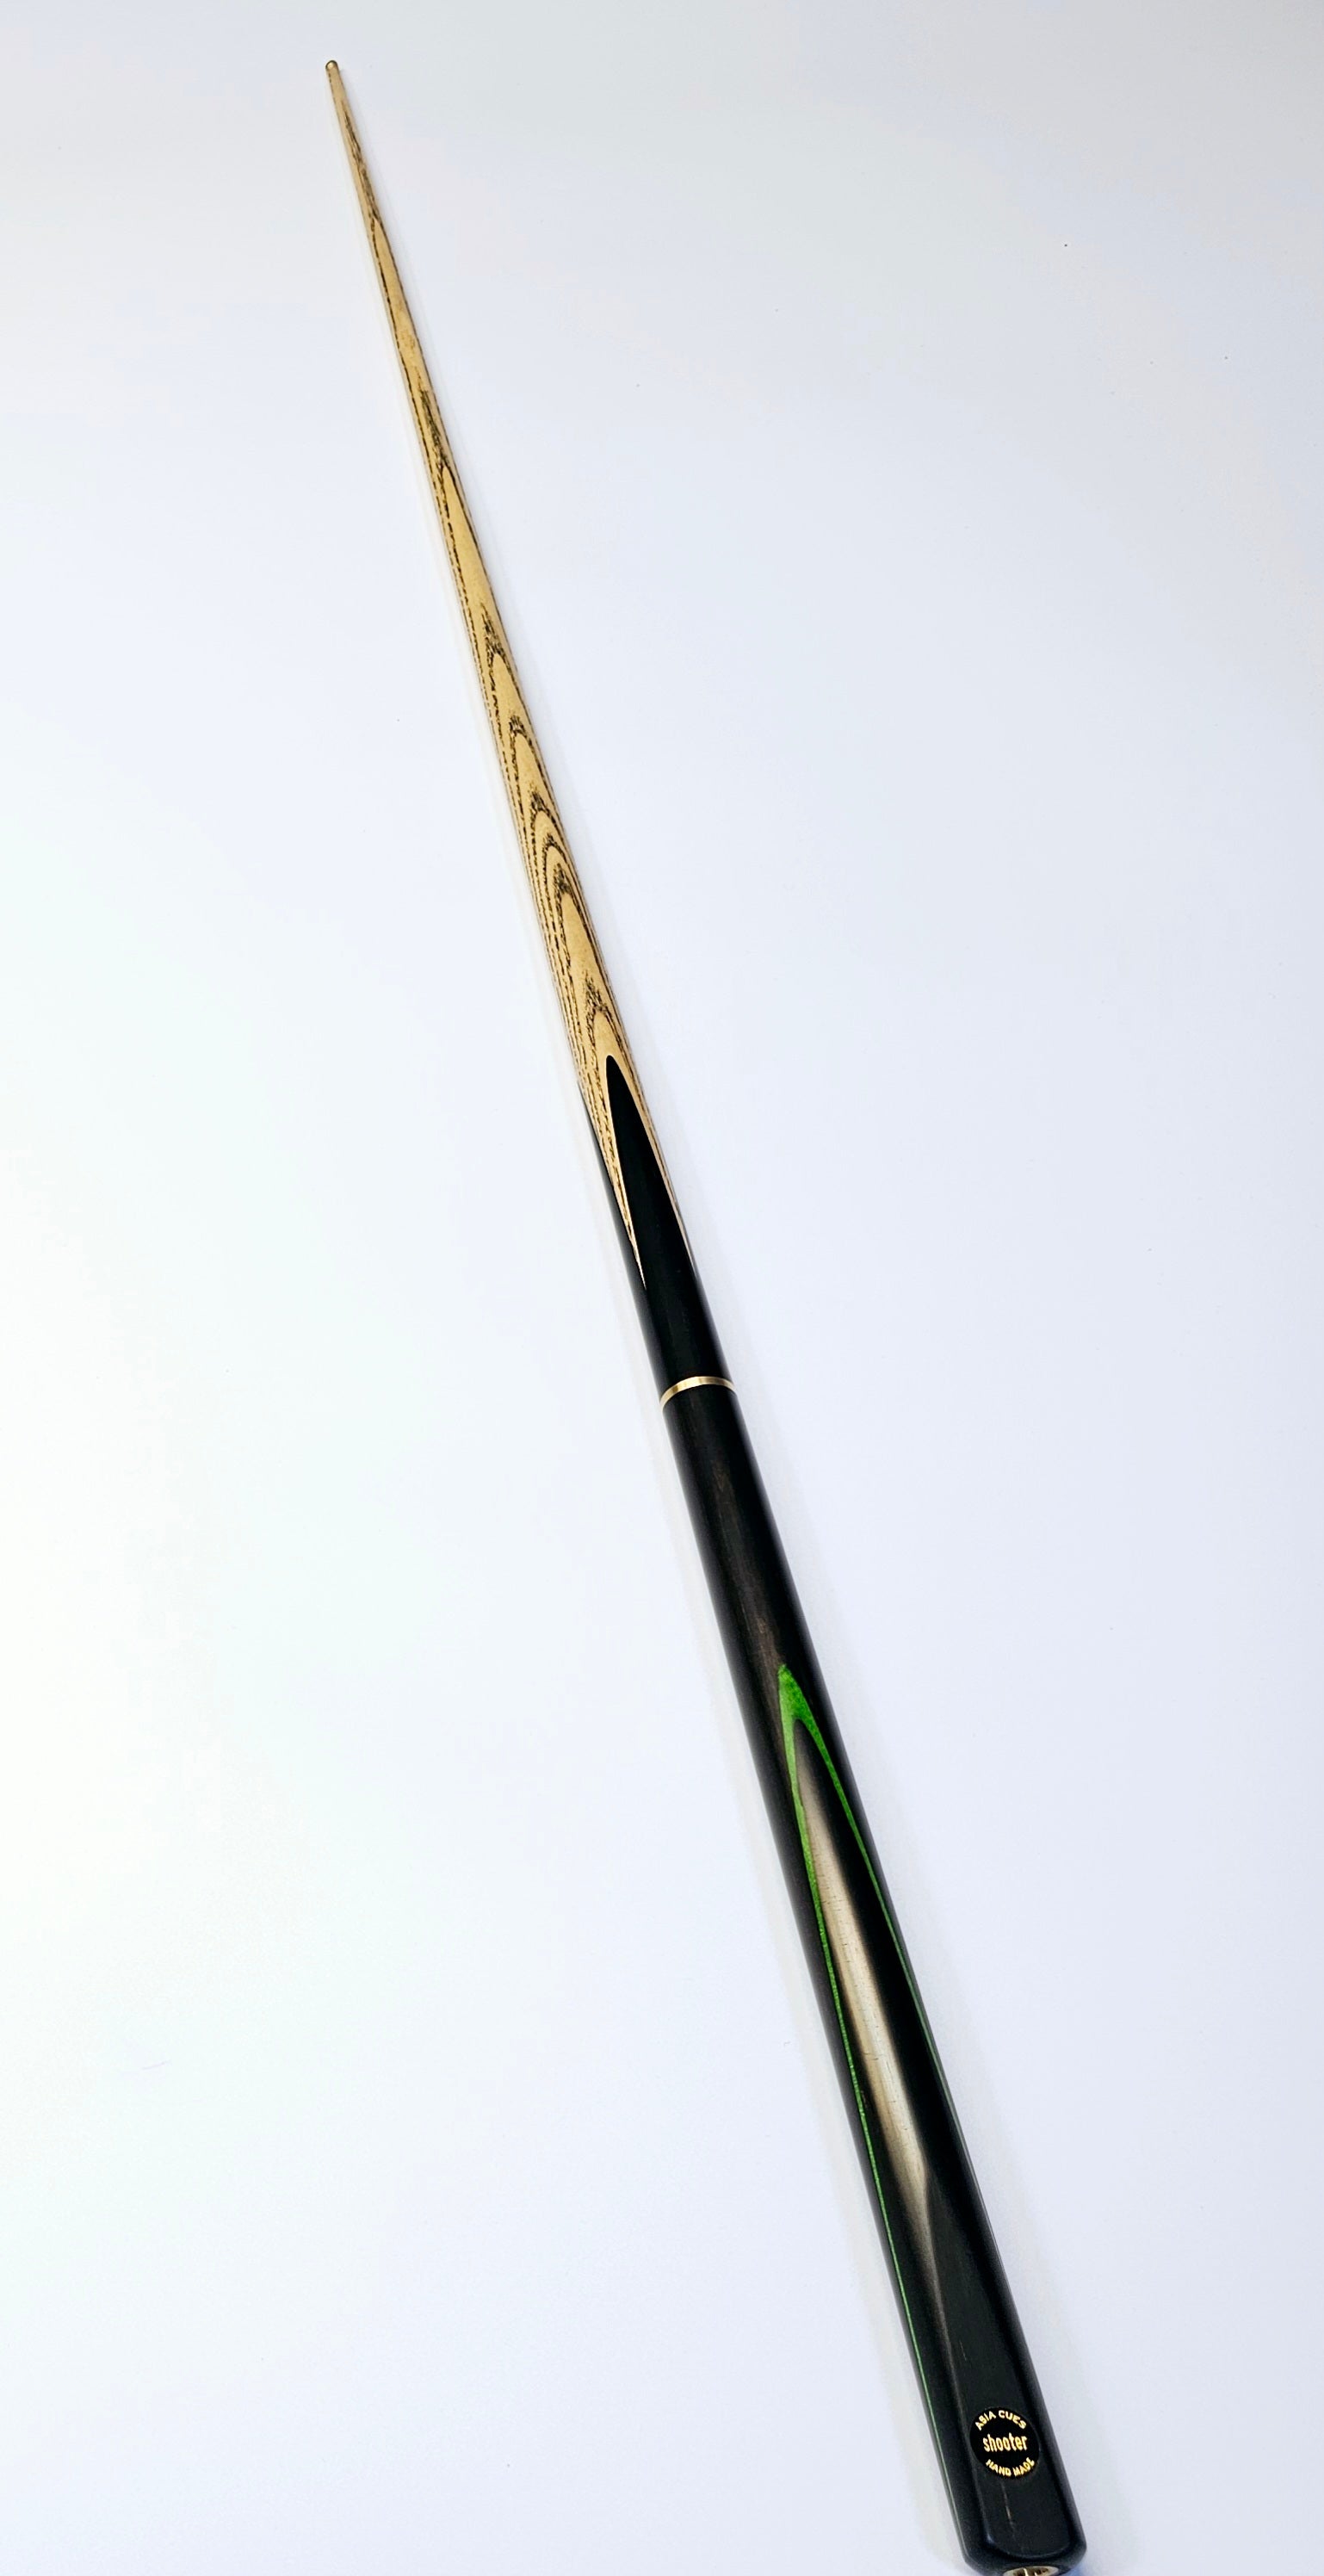 Asia Cues Shooter - 3/4 Jointed Pool Cue 8.7mm Tip, 17.5oz, 58"